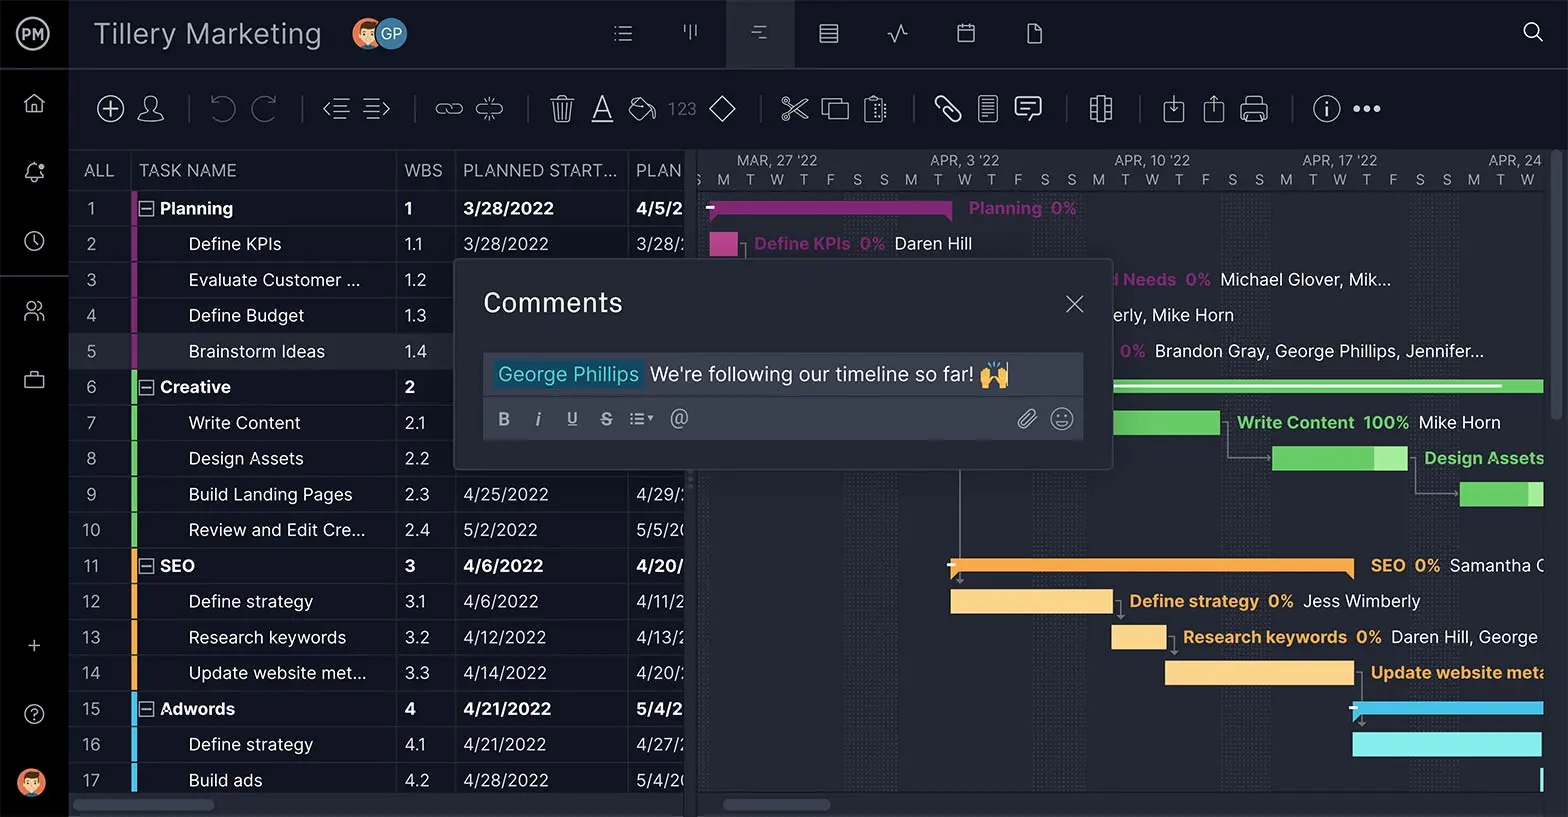 ProjectManager's project schedule lets you collaborate in real time